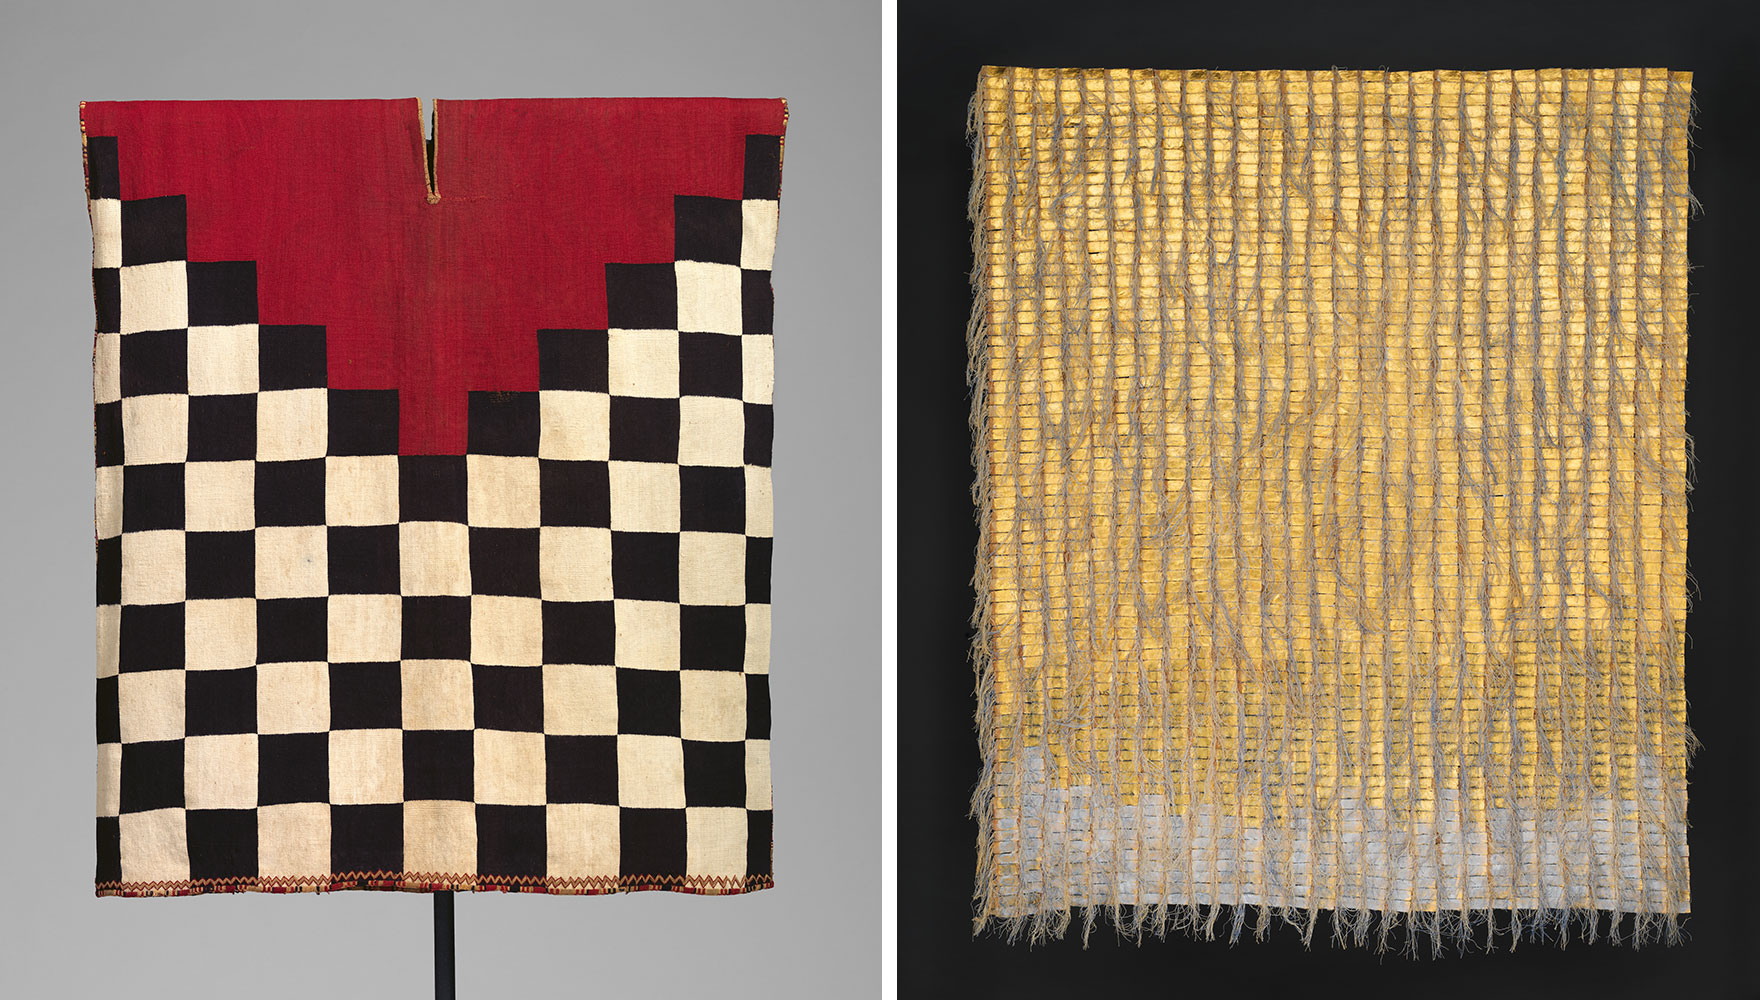 Left: Inca artist, Tunic, 16th century, Argentina, Peru, or Bolivia, Camelid fiber, 34 1/4 x 30 1/8 in. (87 x 76.5 cm), The Metropolitan Museum of Art, Purchase, Fletcher Fund, Claudia Quentin Gift, and Harris Brisbane, Dick Fund, 2017, (2017.674), Image: © The Metropolitan Museum of ArtRight: Olga de Amaral, Alquimia 13, 1984, Linen, rice paper, gesso, indigo red and gold leaf, 72 × 62 in. (182.9 × 157.5 cm), Gift of Olga and Jim de Amaral, 1987, The Metropolitan Museum of Art (1987.387) Image: © Courtesy Olga de Amaral. Image © The Metropolitan Museum of Art, photo by Peter Zeray 